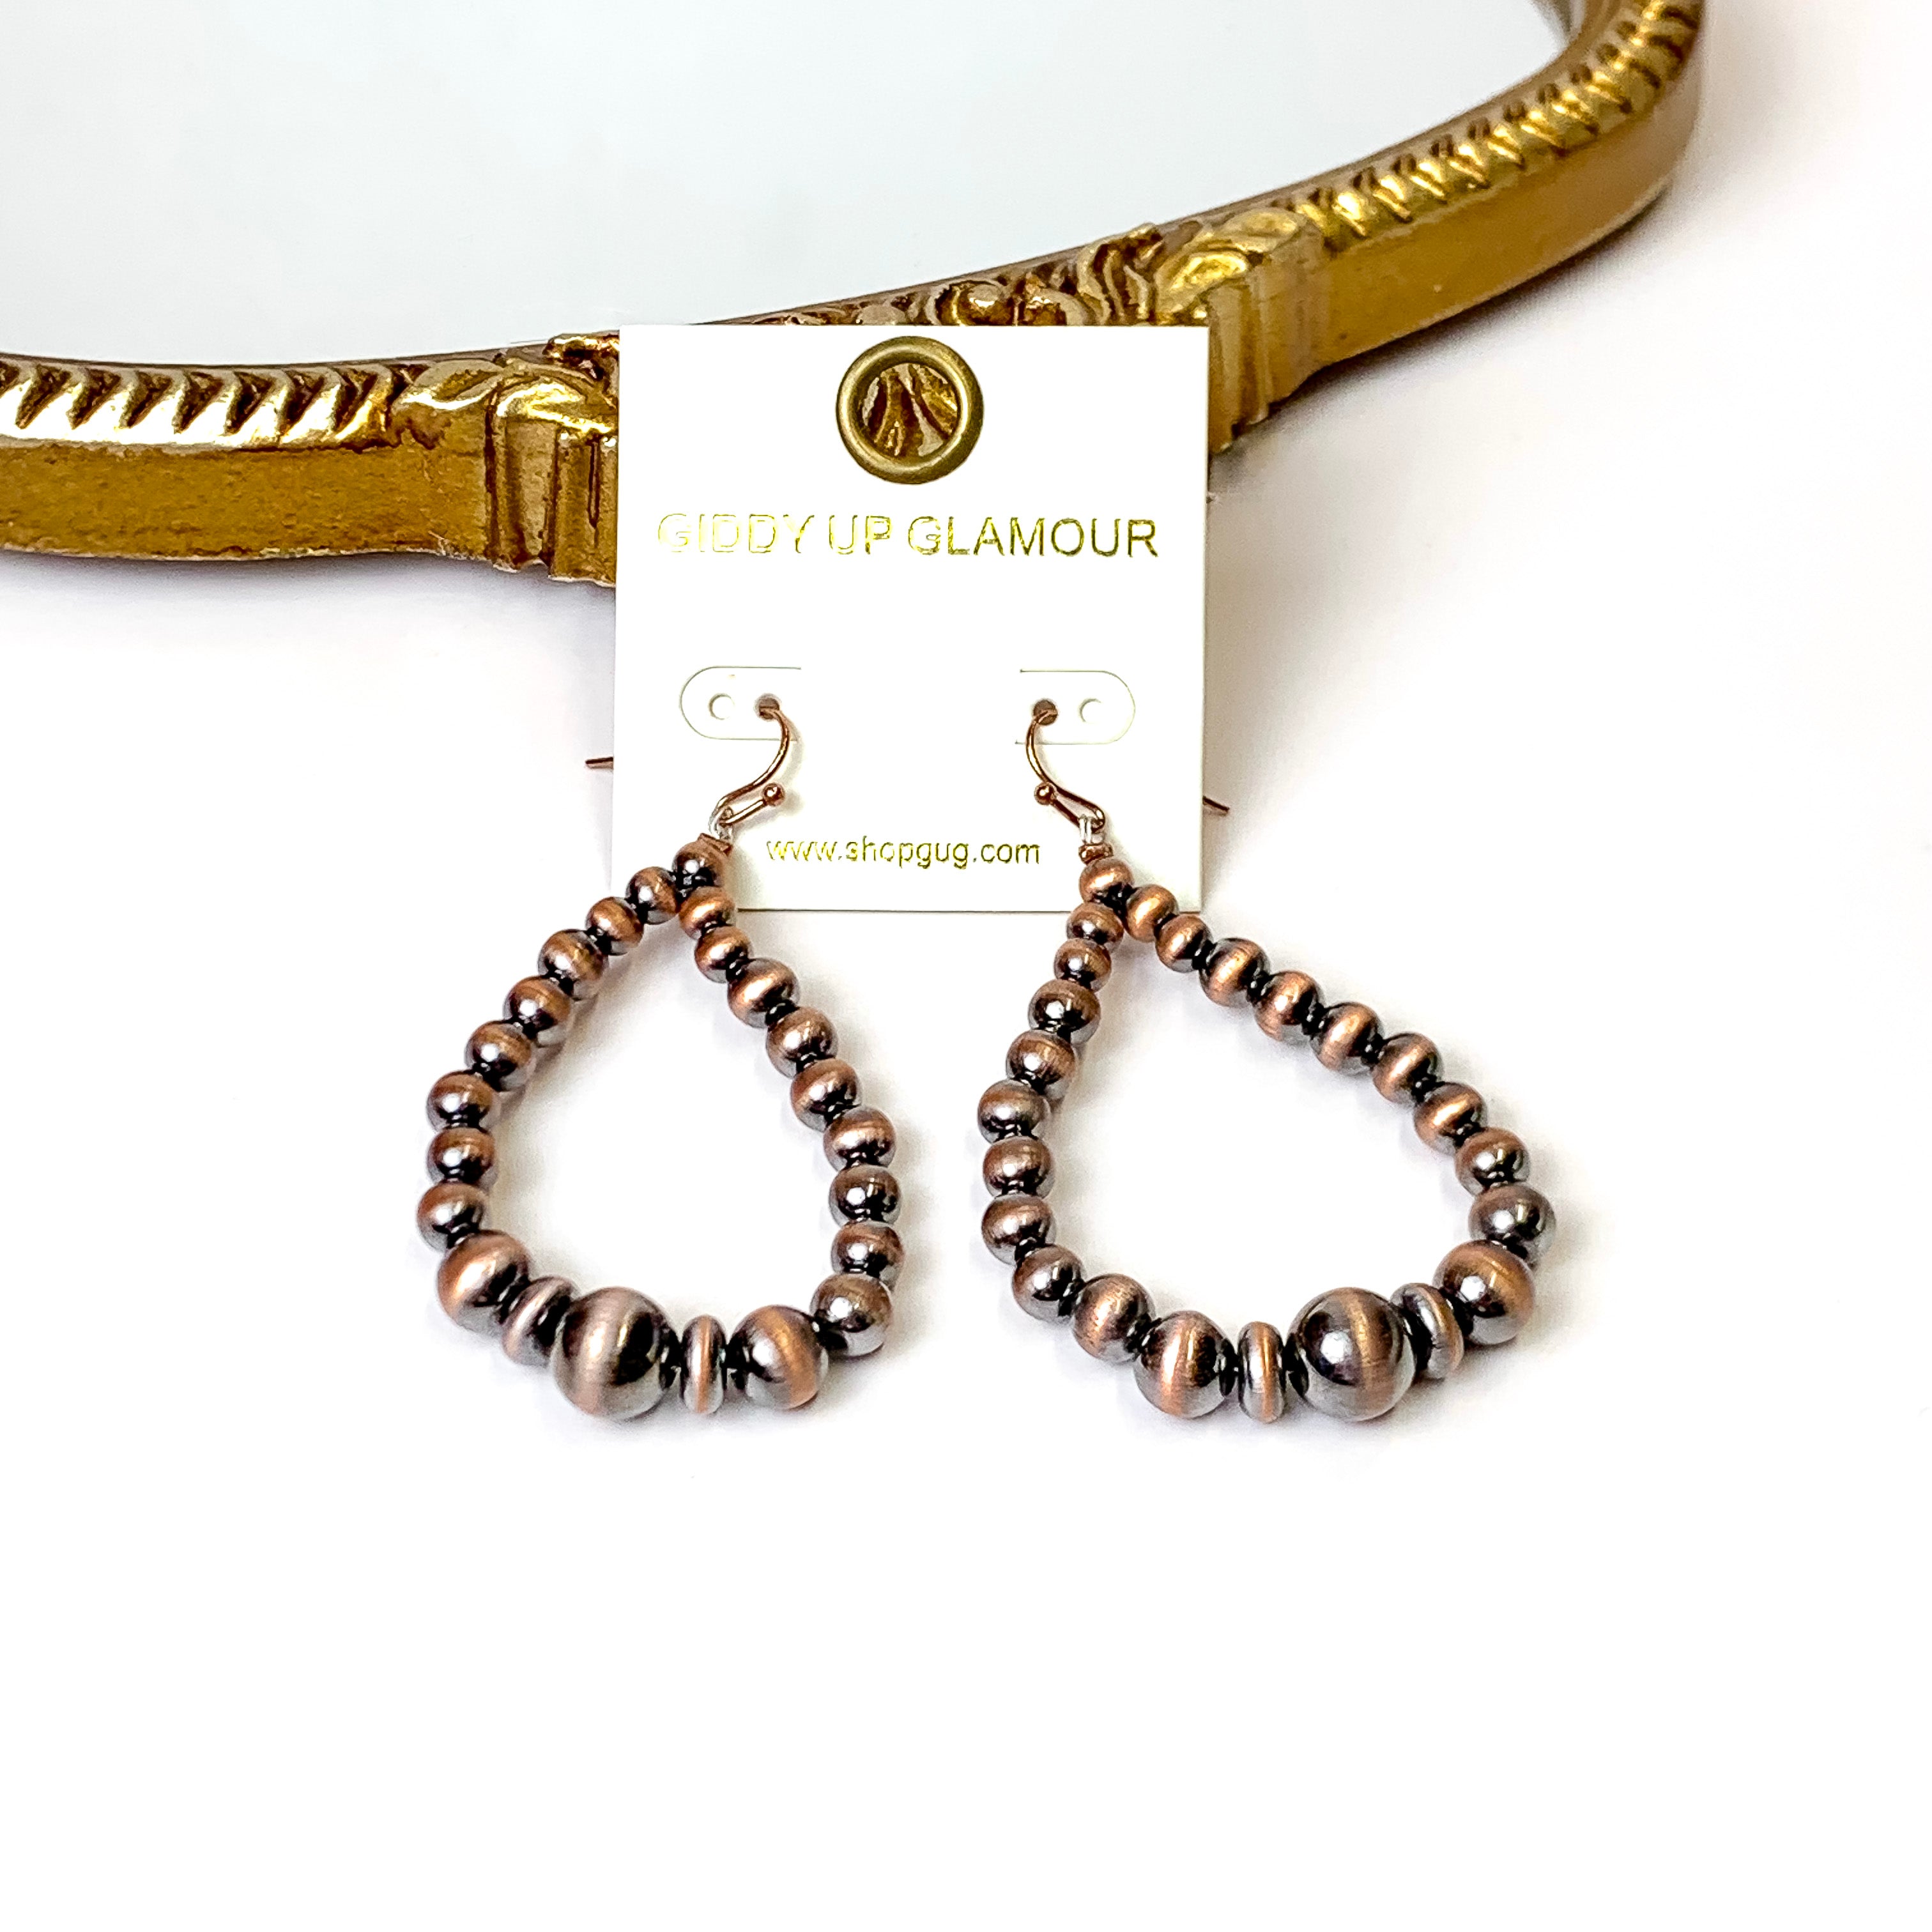 Graduated Faux Navajo Pearl Beaded Teardrop Earrings in Copper Tone - Giddy Up Glamour Boutique